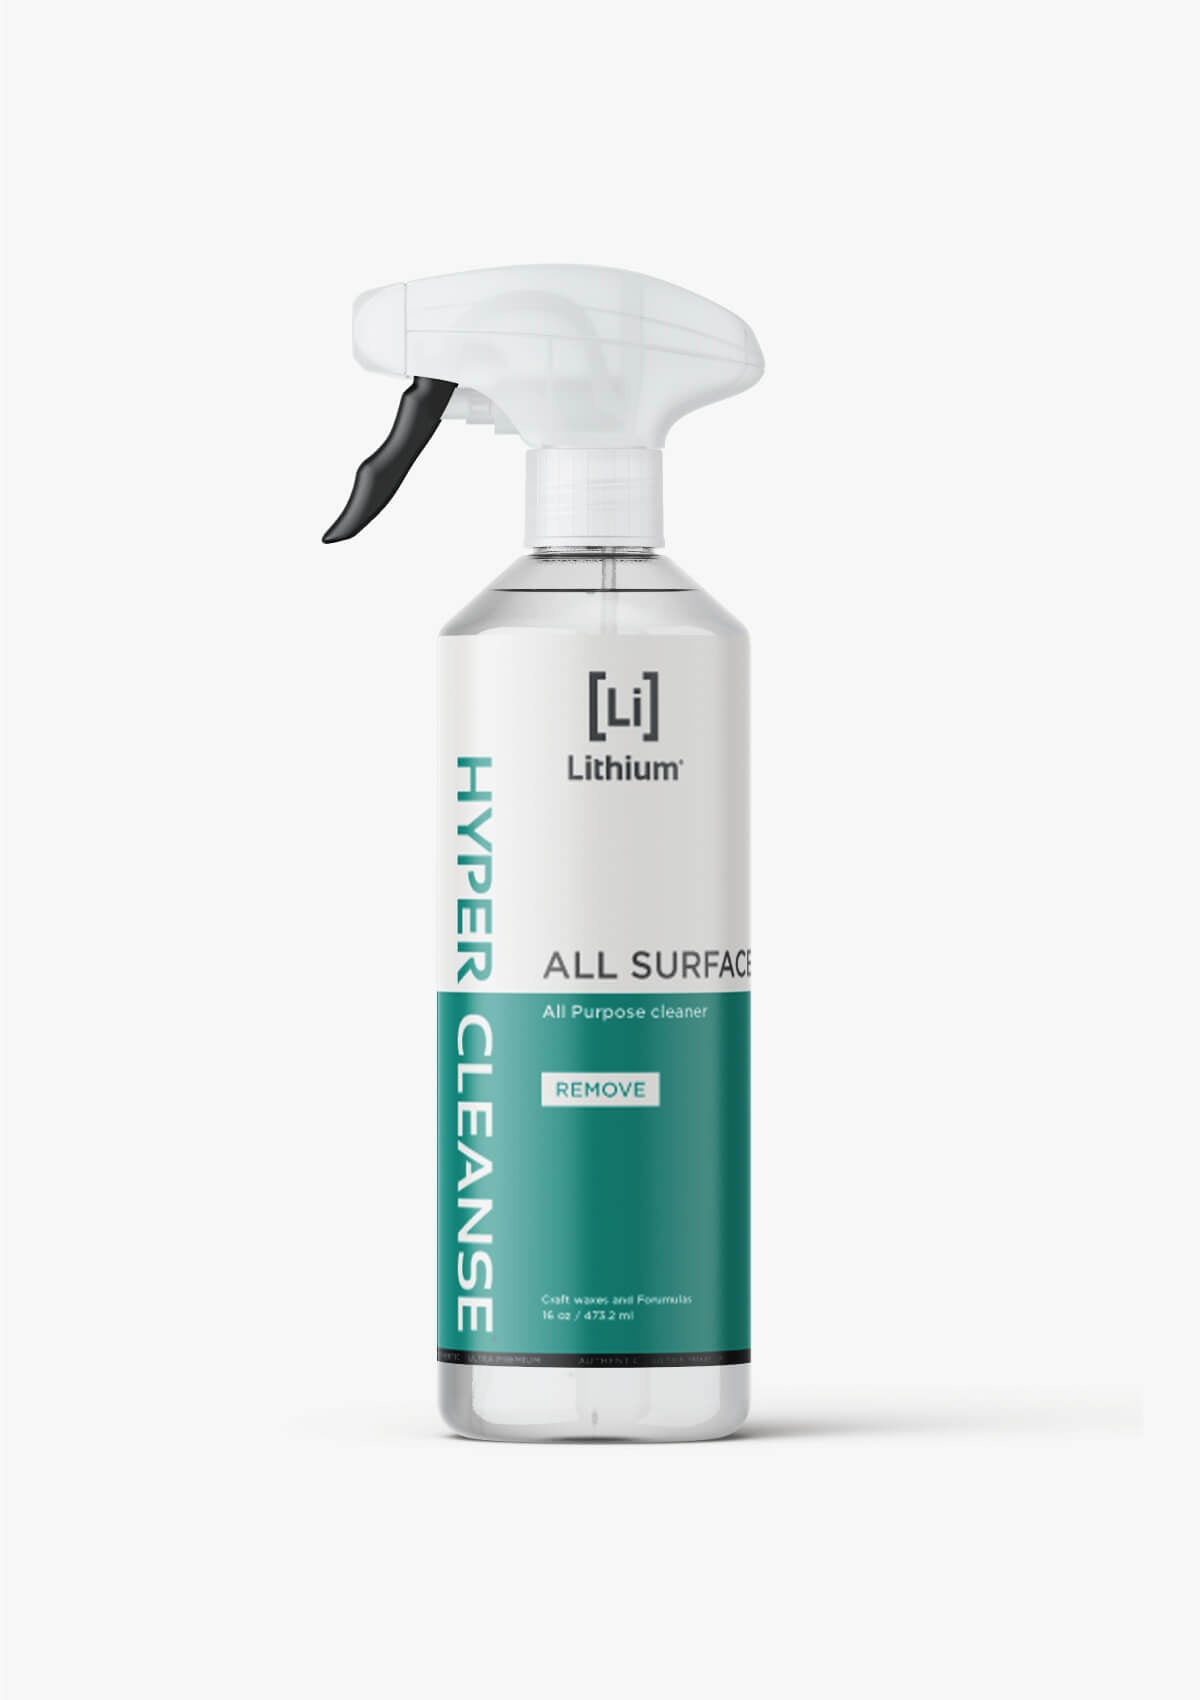 Lithium Auto Elixirs Lithium Hyper Cleanse- All Purpose Cleaner- Newest Science in Cleaning Leather, Plastic, Carpet, Vinyl, Removes The Toughest